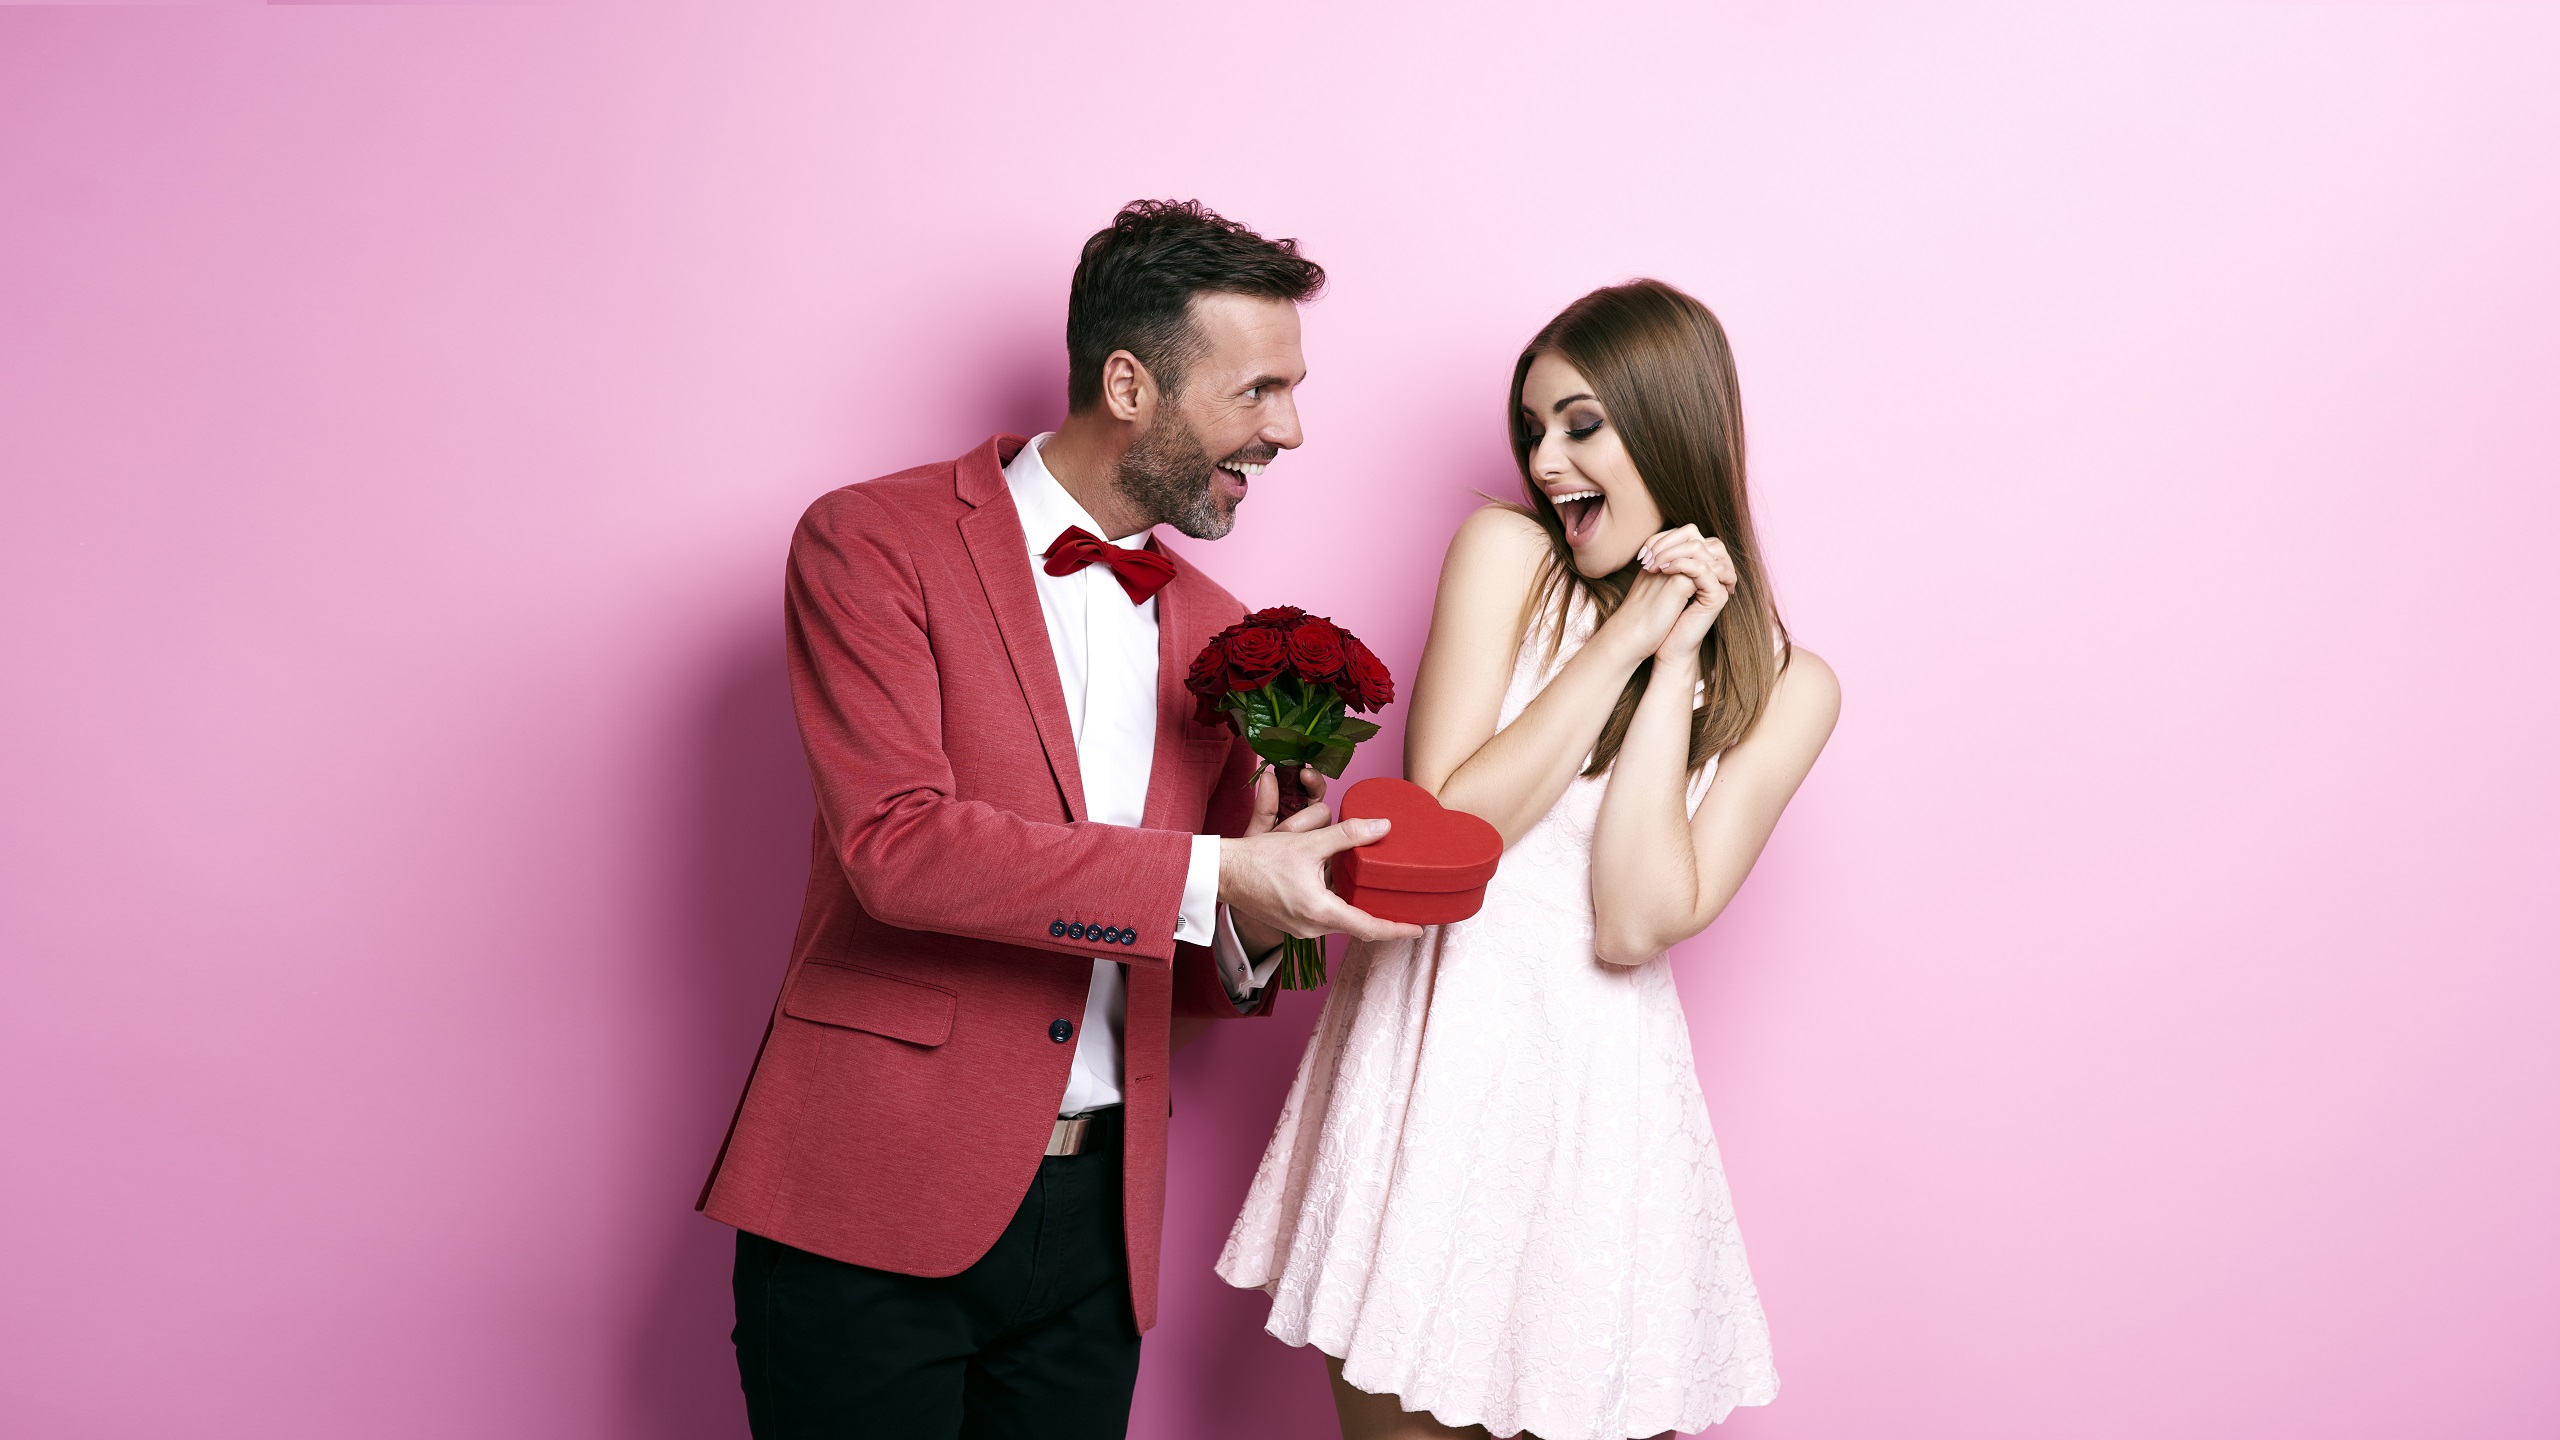 Israeli Businesses, Charity Feel the Love on Valentine’s Day